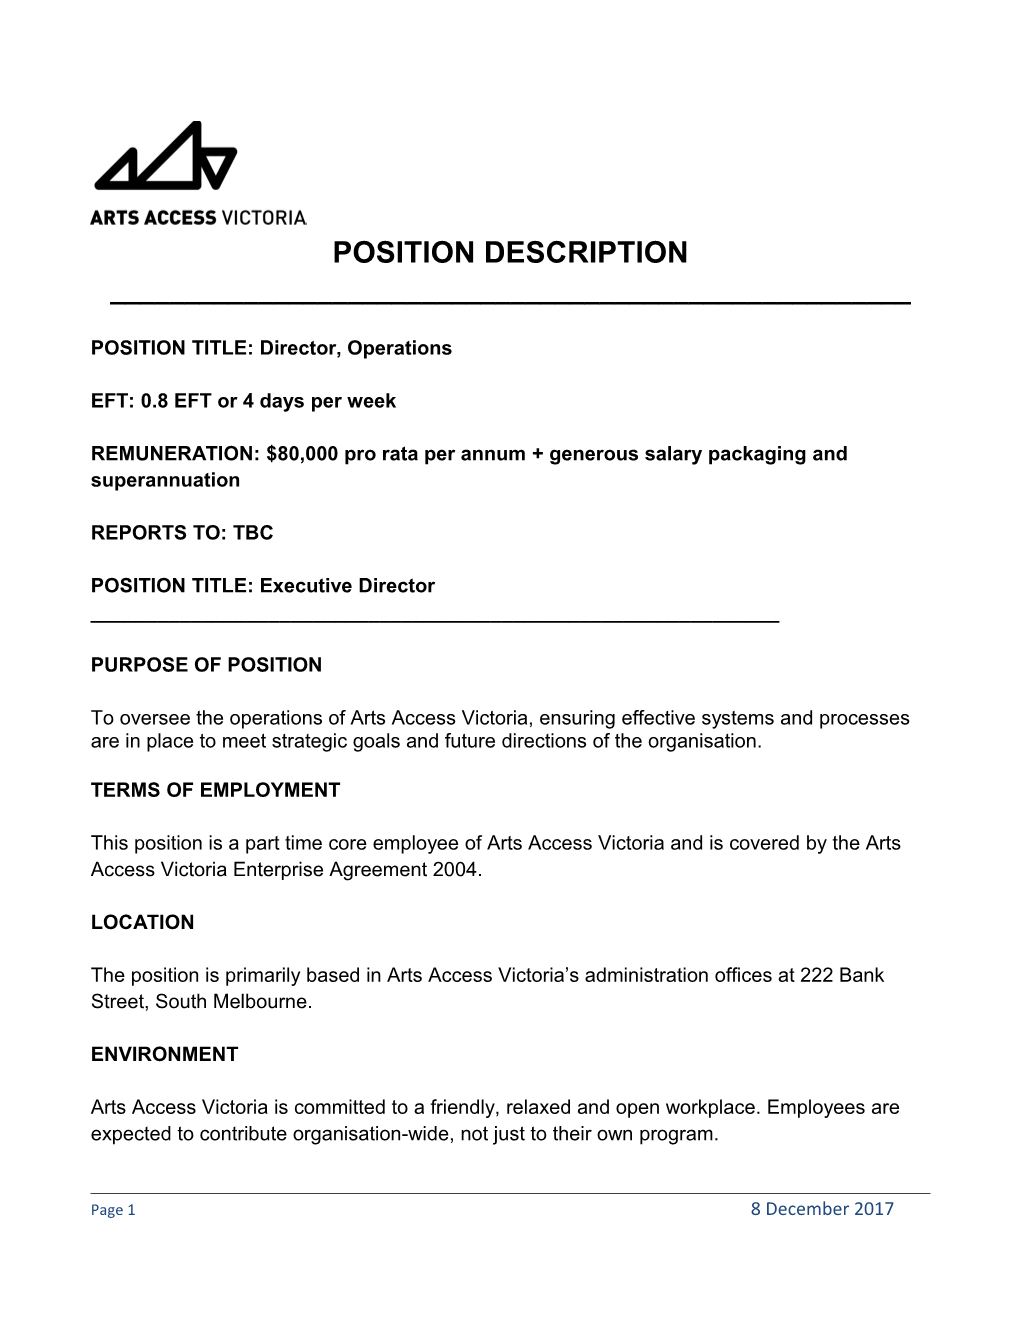 POSITION TITLE:Director, Operations